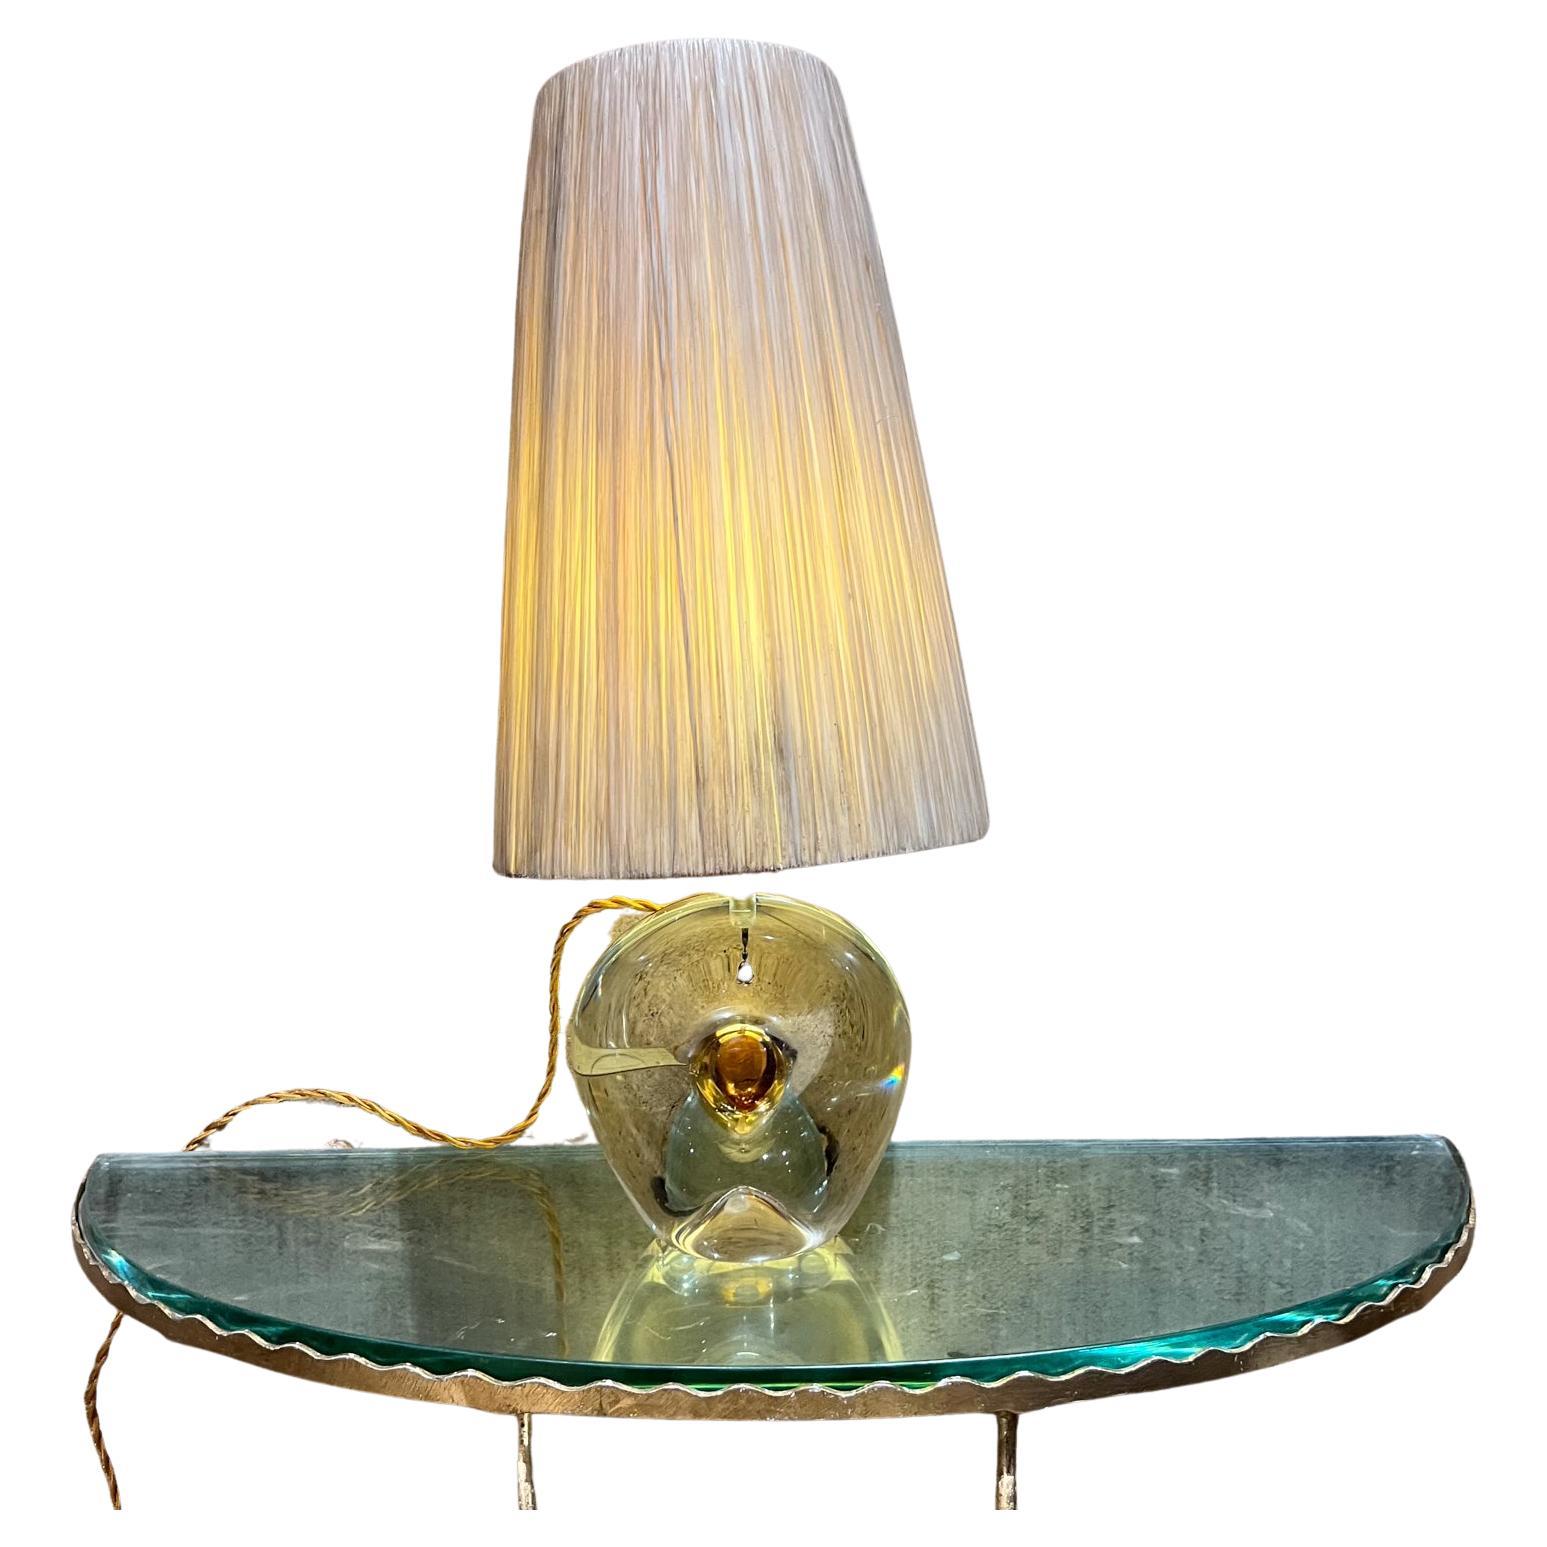 AMBIANIC presents
1960s Murano Art Glass BAK Table Lamp Lamparas Mexico City
lovely sculptural shape with color
Maker stamped.
21.25 h x diameter at widest point
Shade 13.75 h x 5.5 diameter at top
Preowned vintage rewired, new socket, new twisted